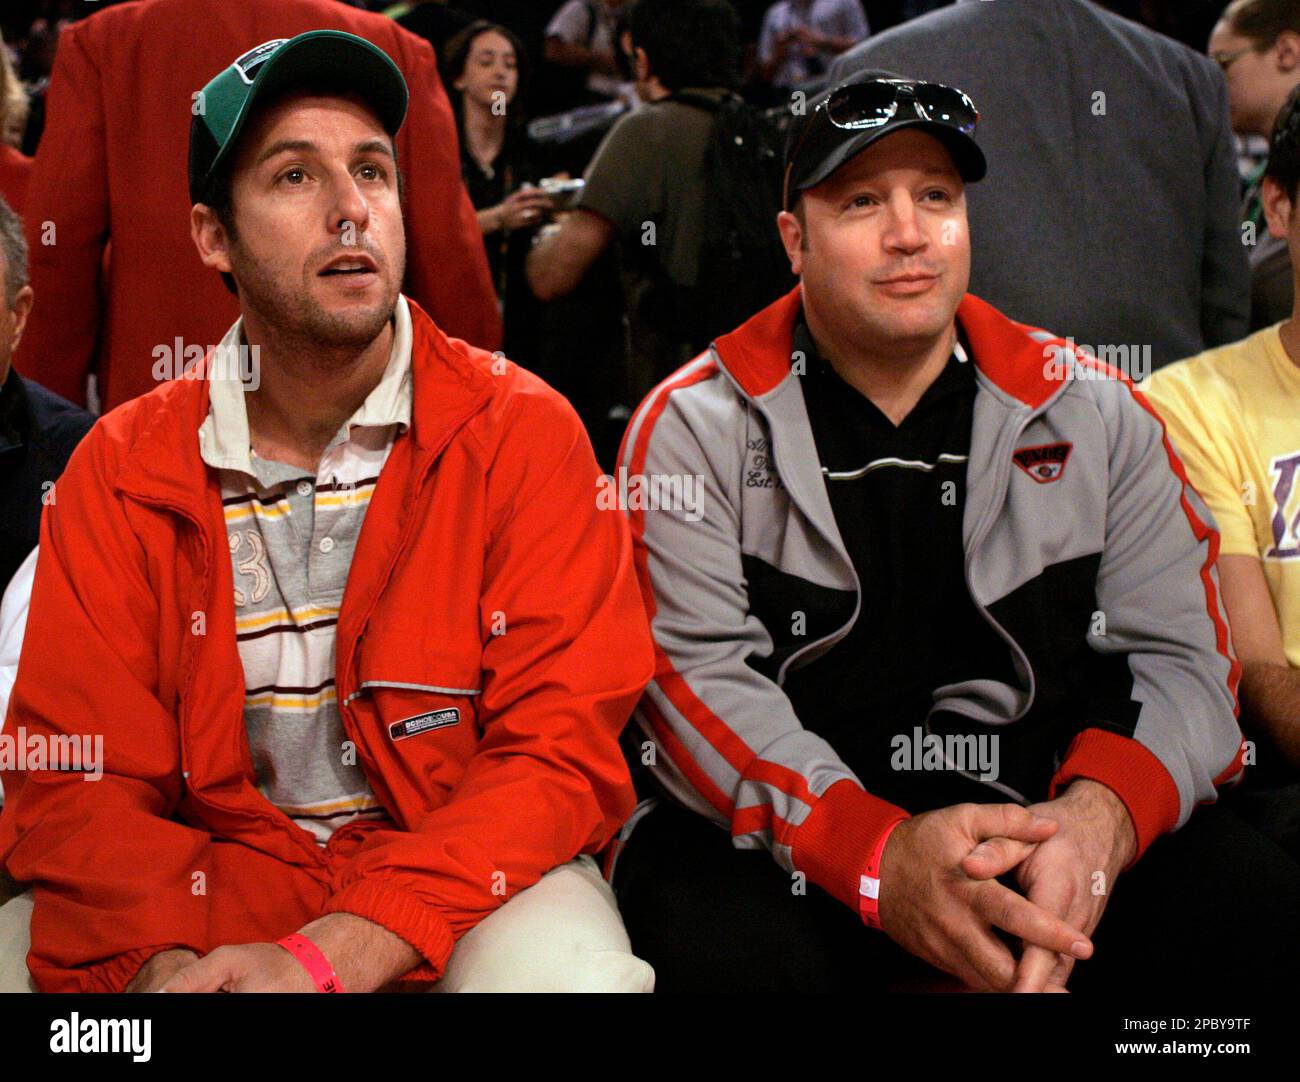 Adam Sandler, left, and Kevin James are shown before the NBA All-Star  basketball game in Las Vegas on Sunday, Feb. 18, 2007. (AP Photo/Kevork  Djansezian Stock Photo - Alamy